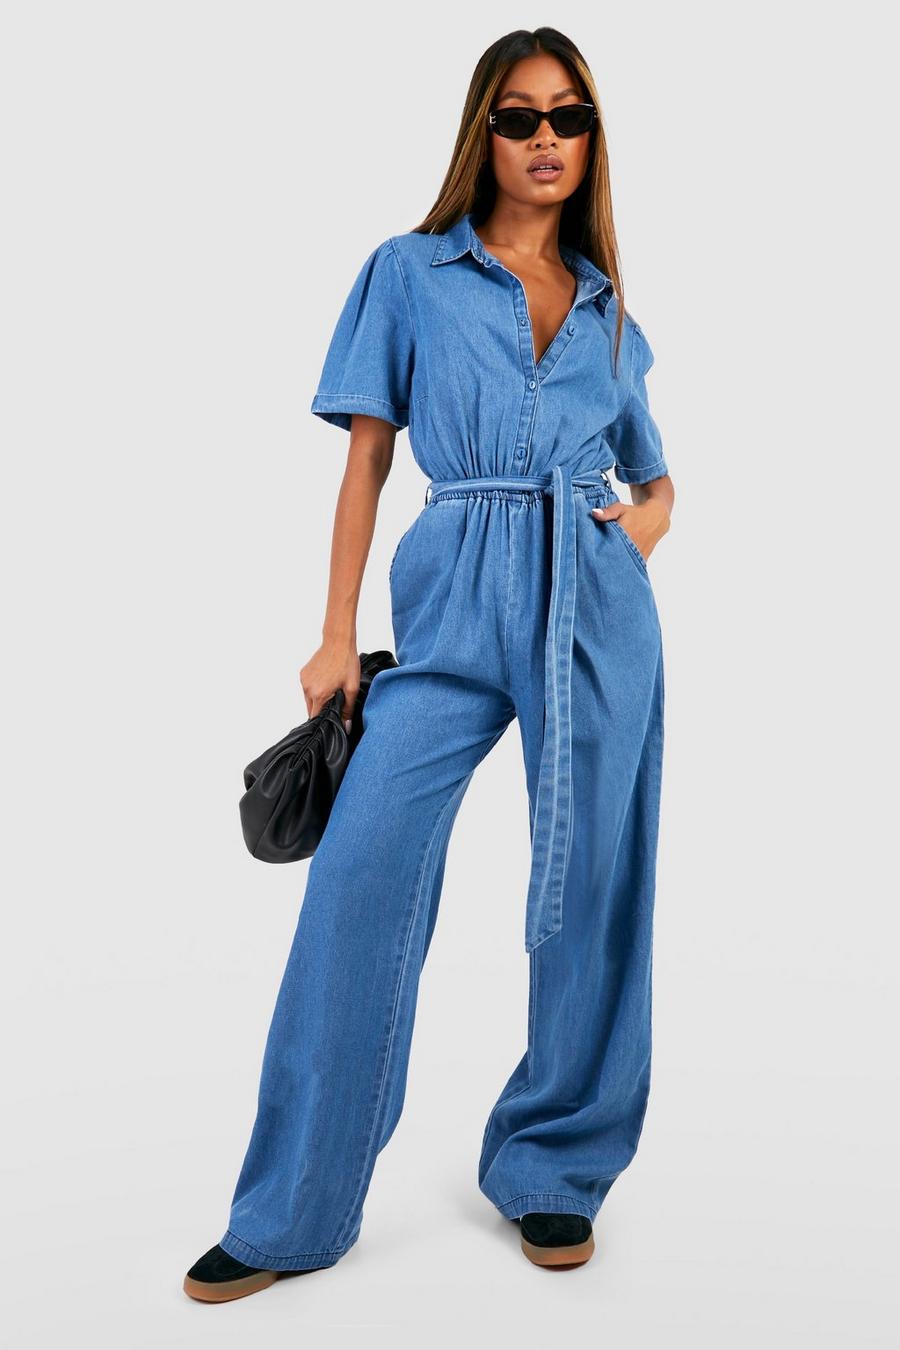 Dungarees and Jumpsuits for Women, Shorts & Denim